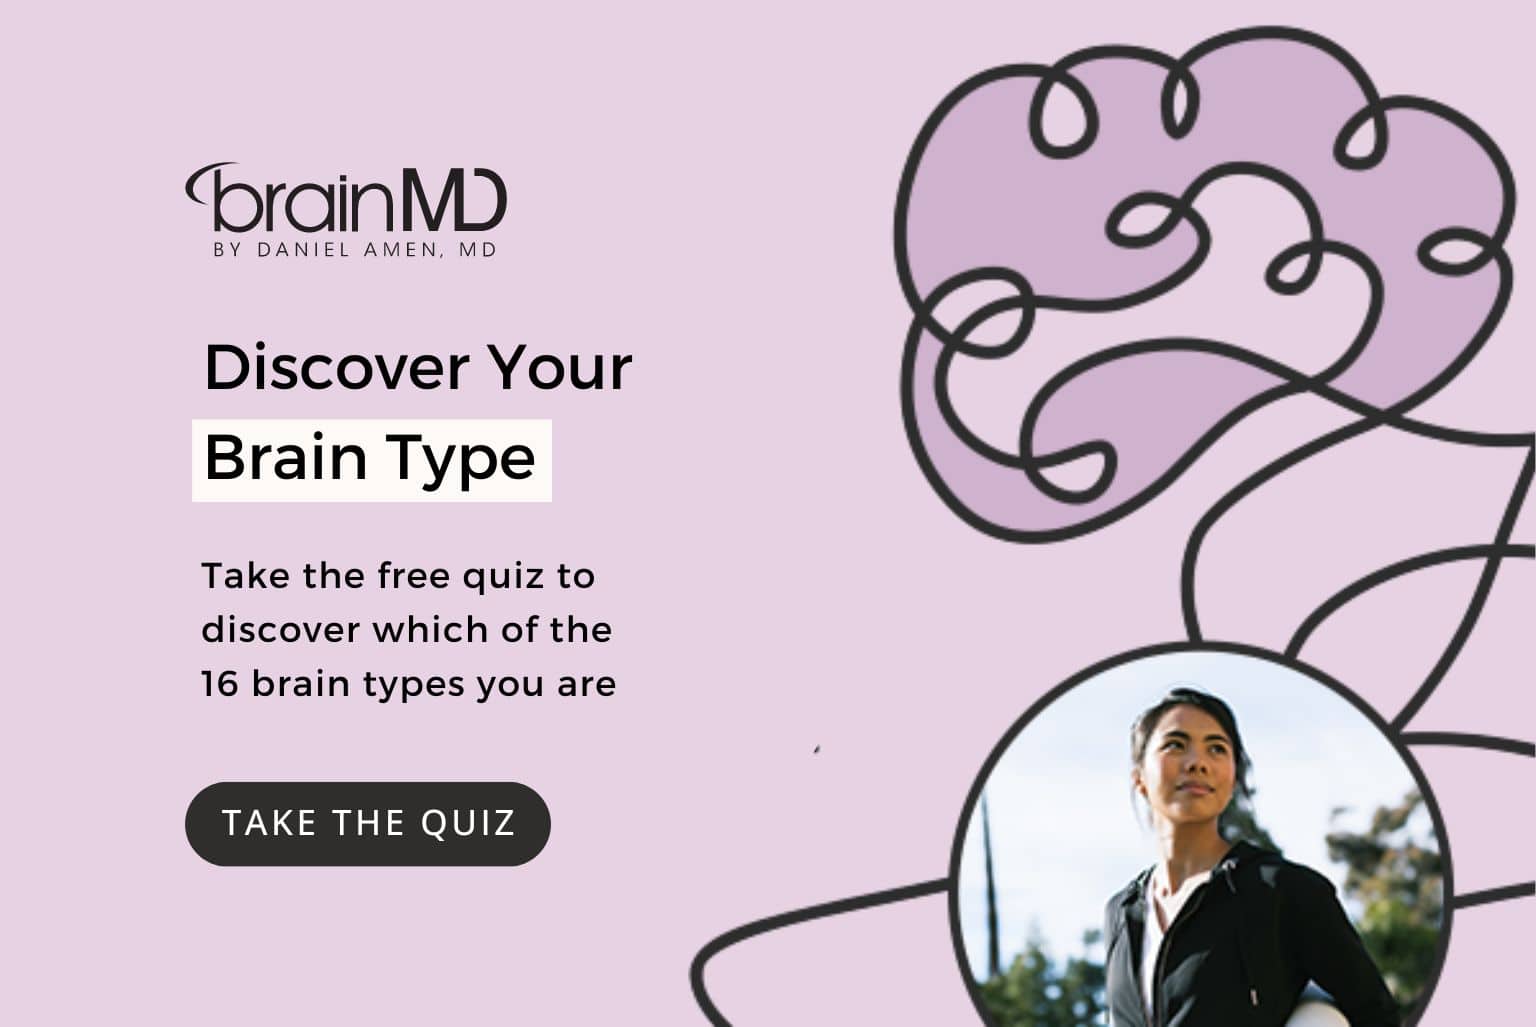 Click here to take Dr. Amen's free quiz to discover which of the 16 brain types you are.